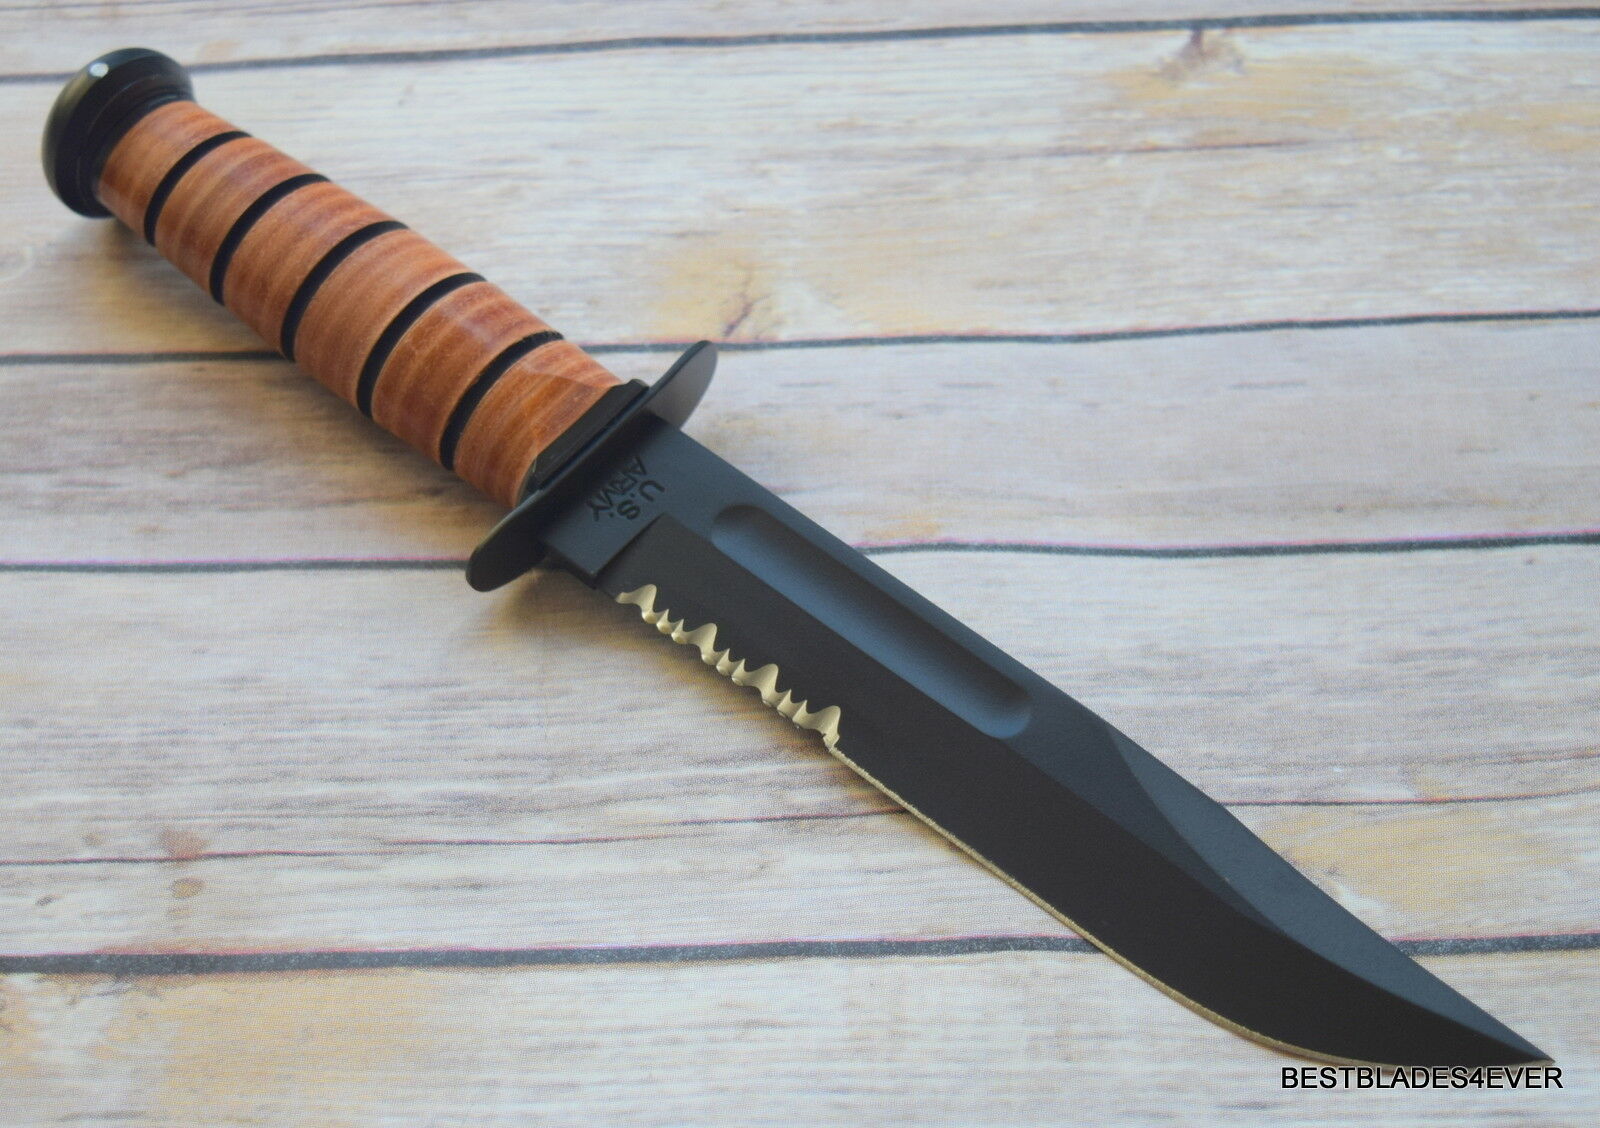 KA-BAR  ARMY MADE IN USA HUNTING TACTICAL COMBAT KNIFE WITH LEATHER  SHEATH - BestBlades4Ever